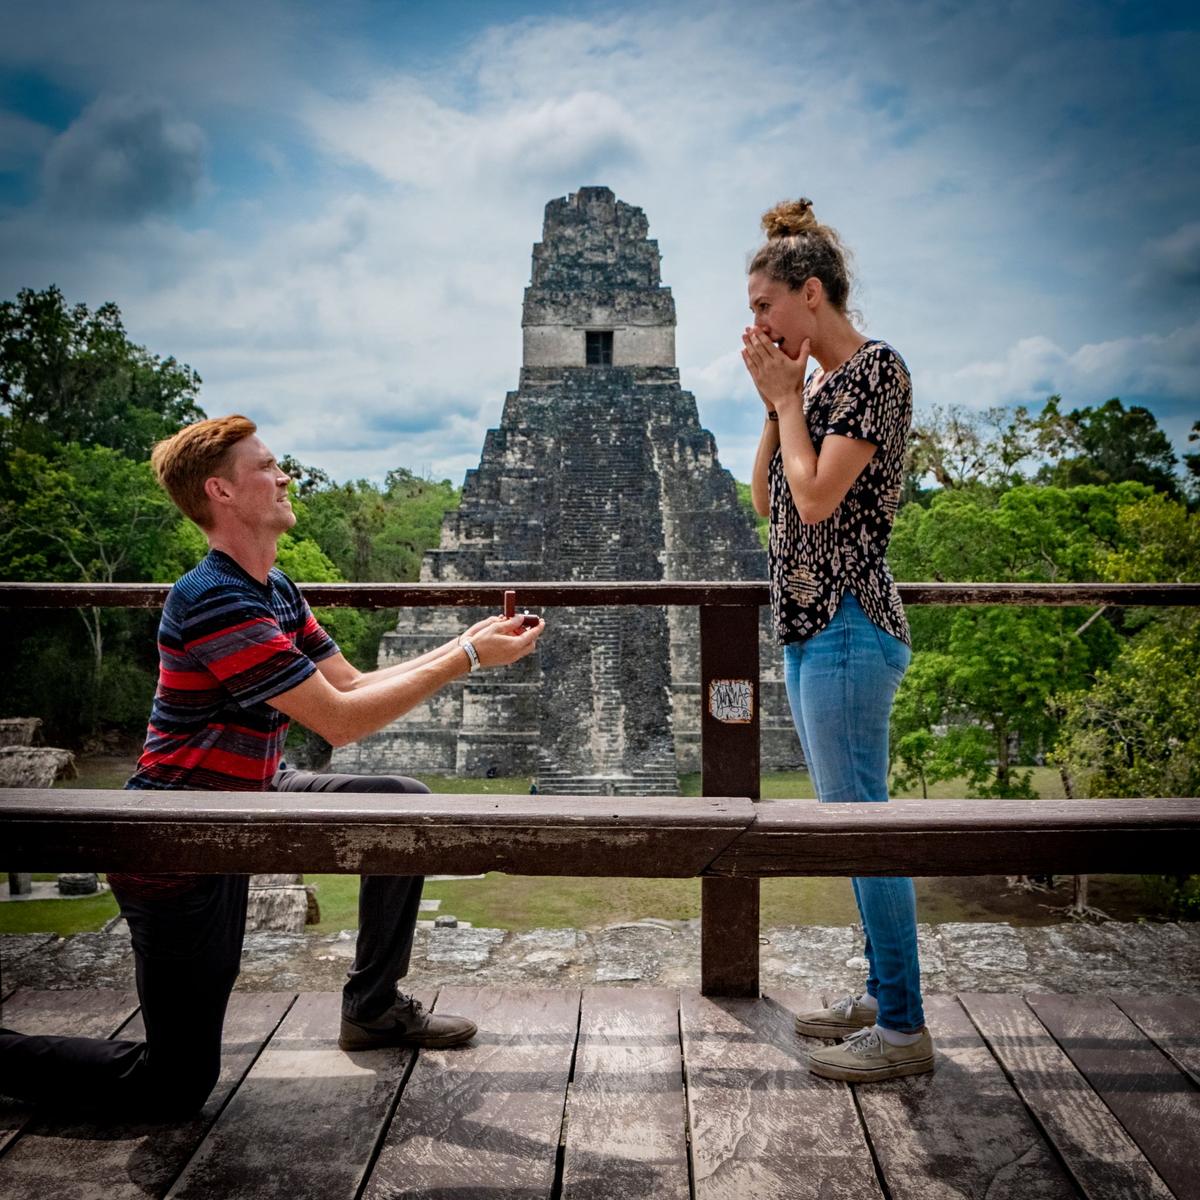 Trent proposes to Allie on top of a pyramid in Tikal, one of the largest Mayan ruins in a remote jungle in northern Guatemala. (Courtesy of <a href="https://www.youtube.com/channel/UCwh2SF7McSUf1GVFVk0nP8w">Trent and Allie</a>)